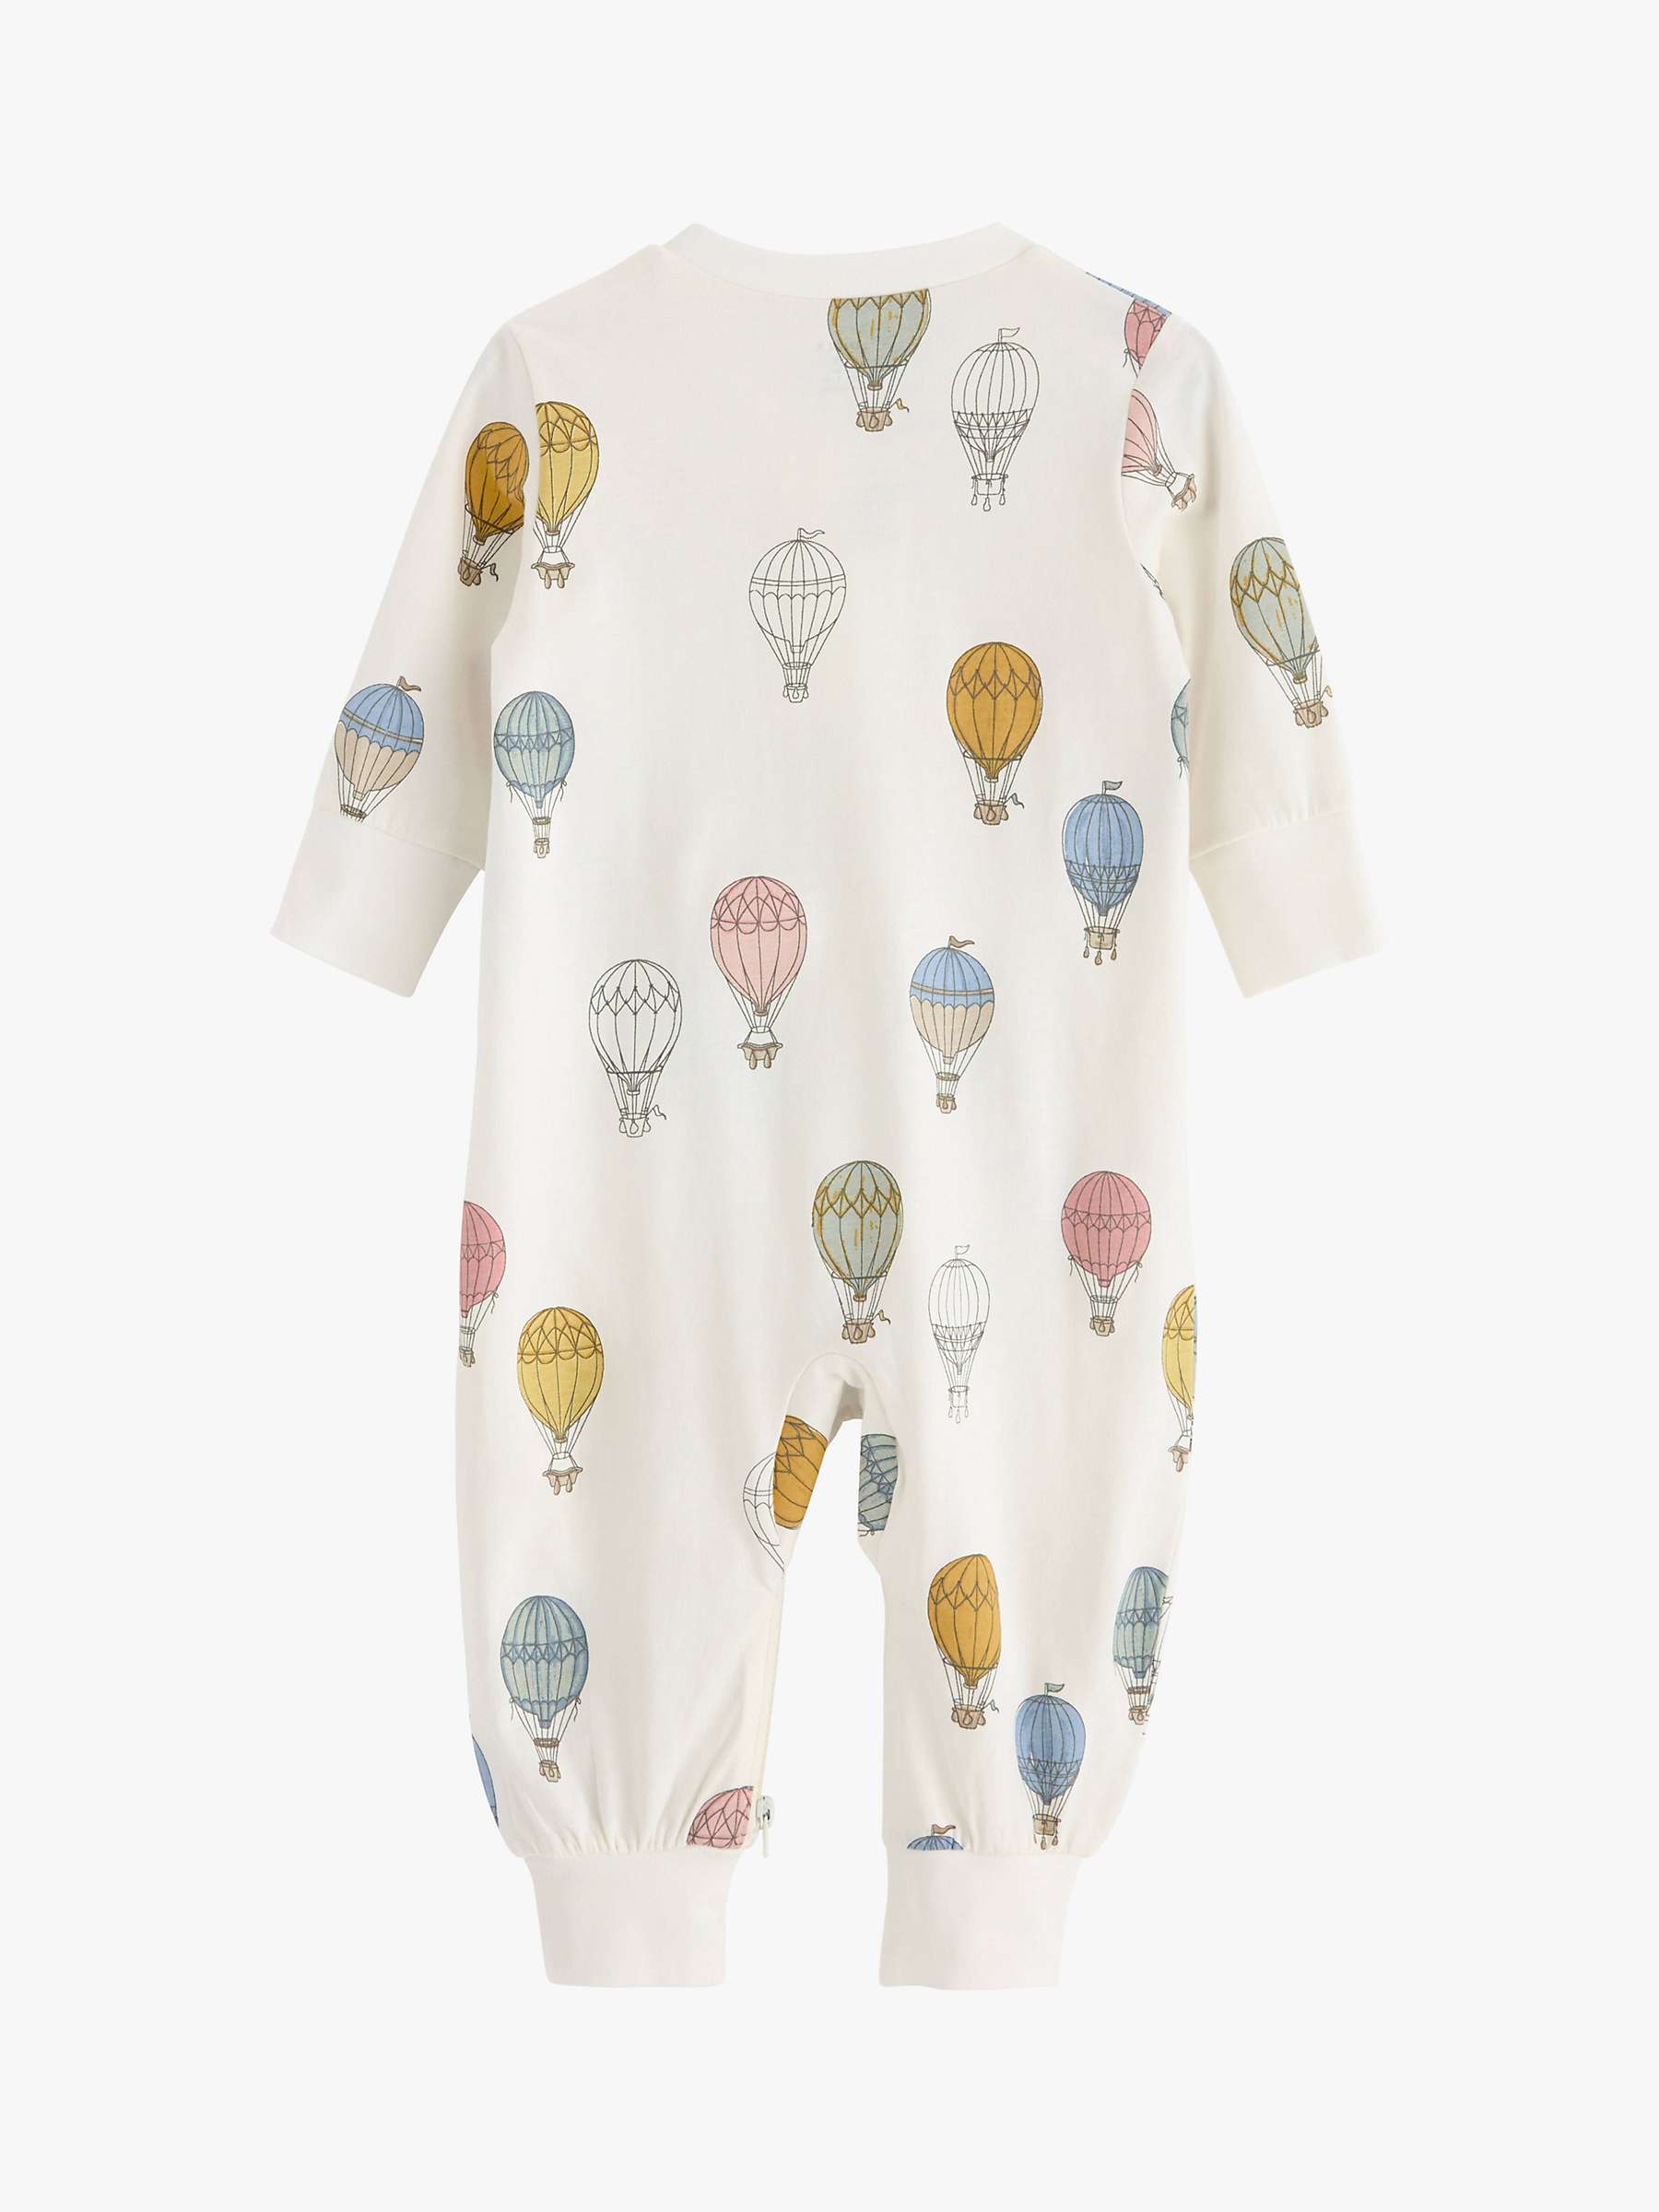 Buy Lindex Baby Organic Cotton Hot Air Balloon Print Sleepsuit, Light Dusty White Online at johnlewis.com